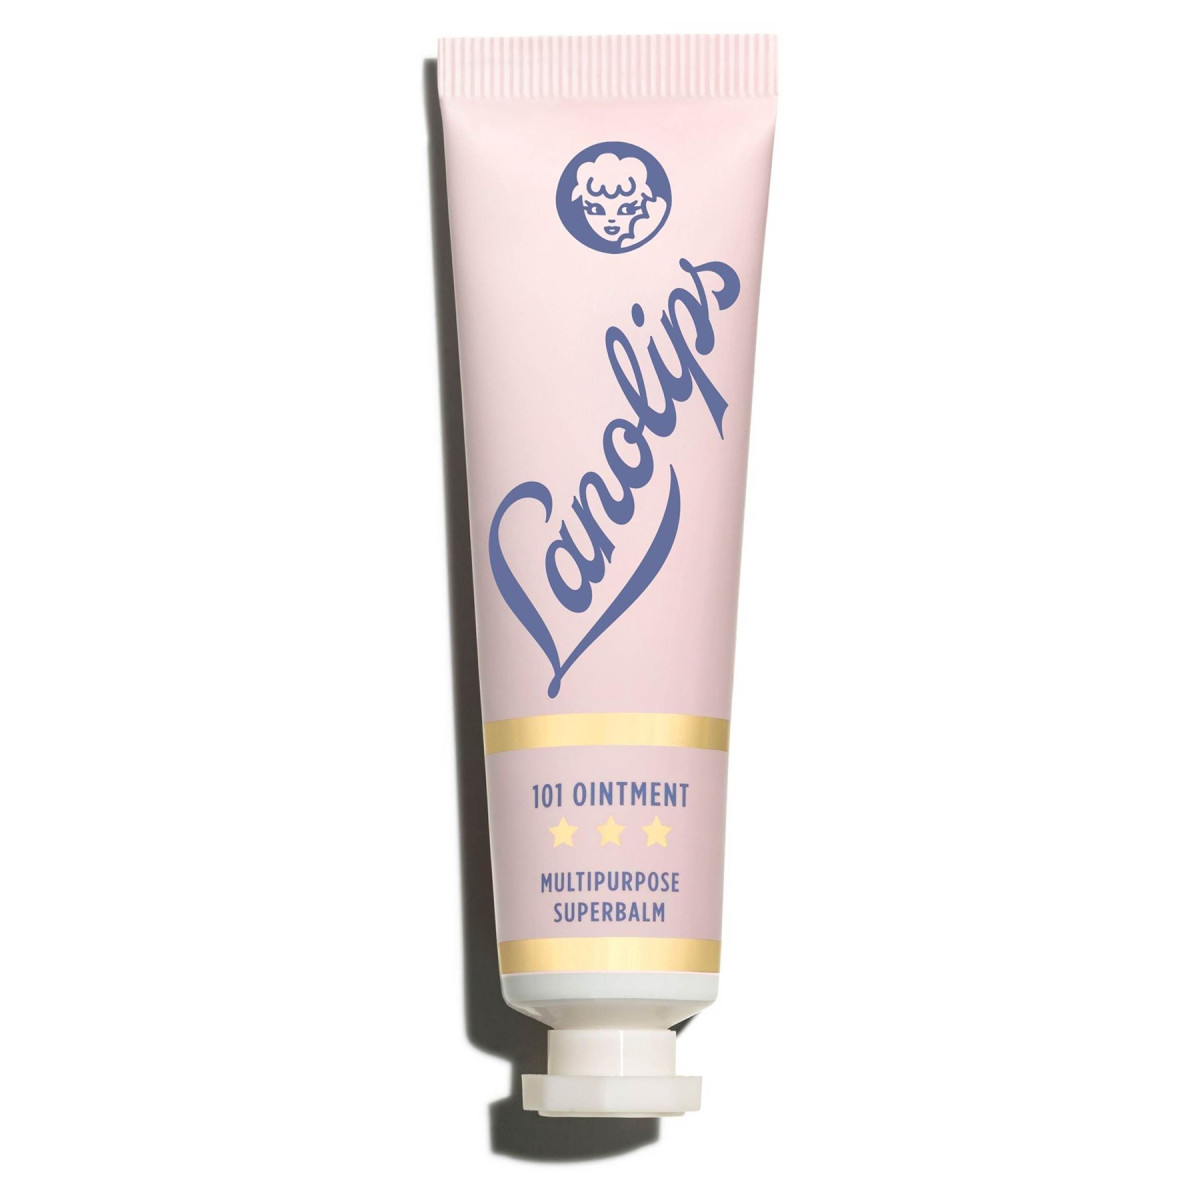 Lano Lanolips 101 Ointment Multipurpose Superbalm isn't called nipple cream but can be used as one; it's blended with lanolin oil to lessen lanolin's natural stickiness